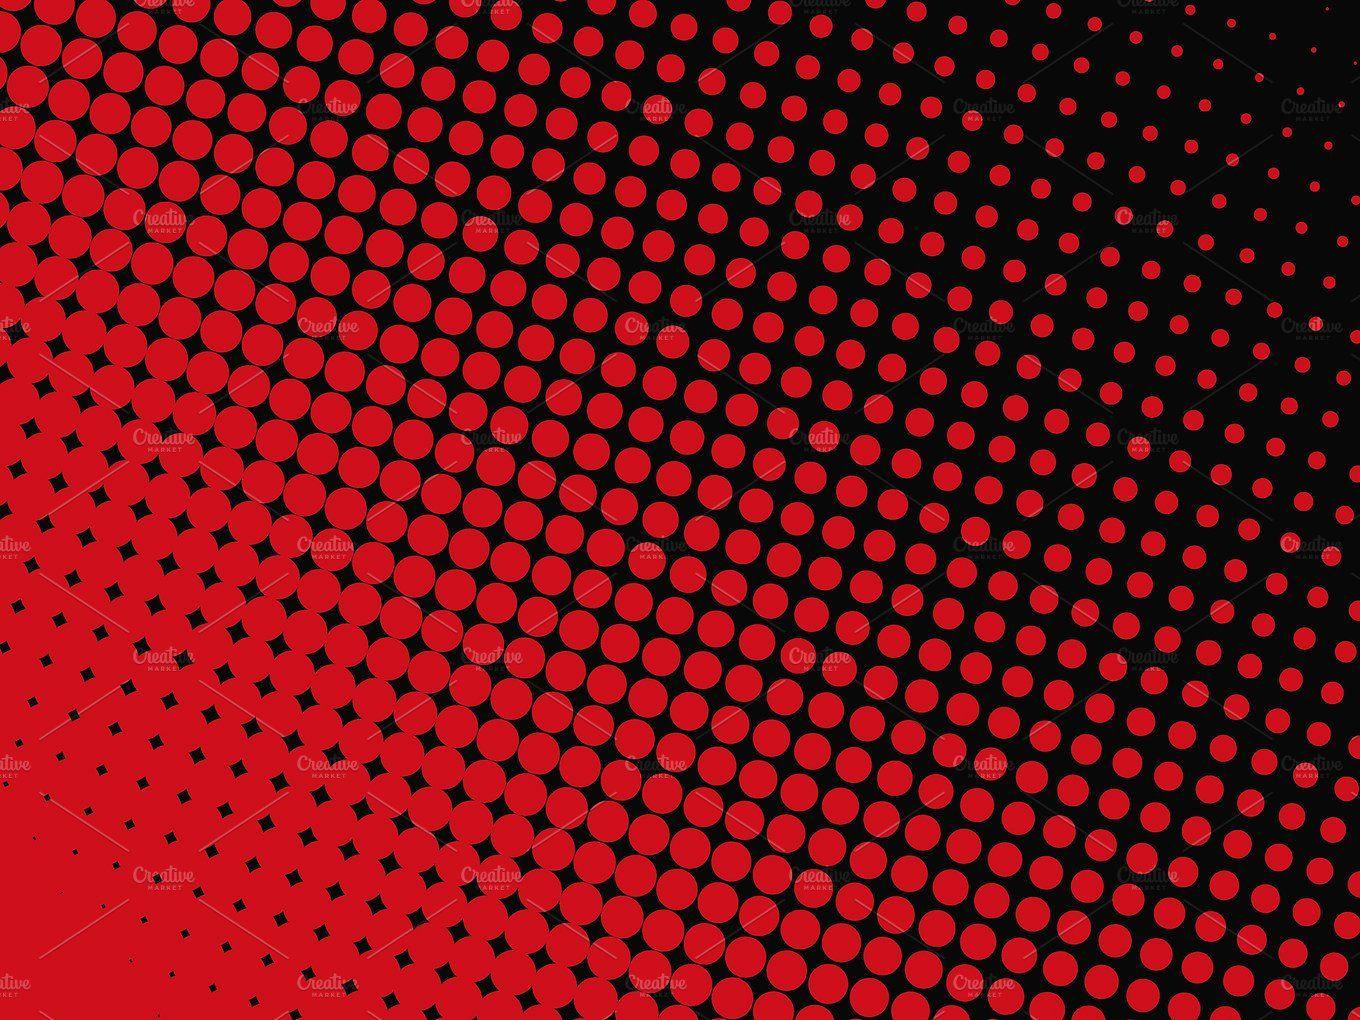 Abstract background of red dots on black background Illustrations